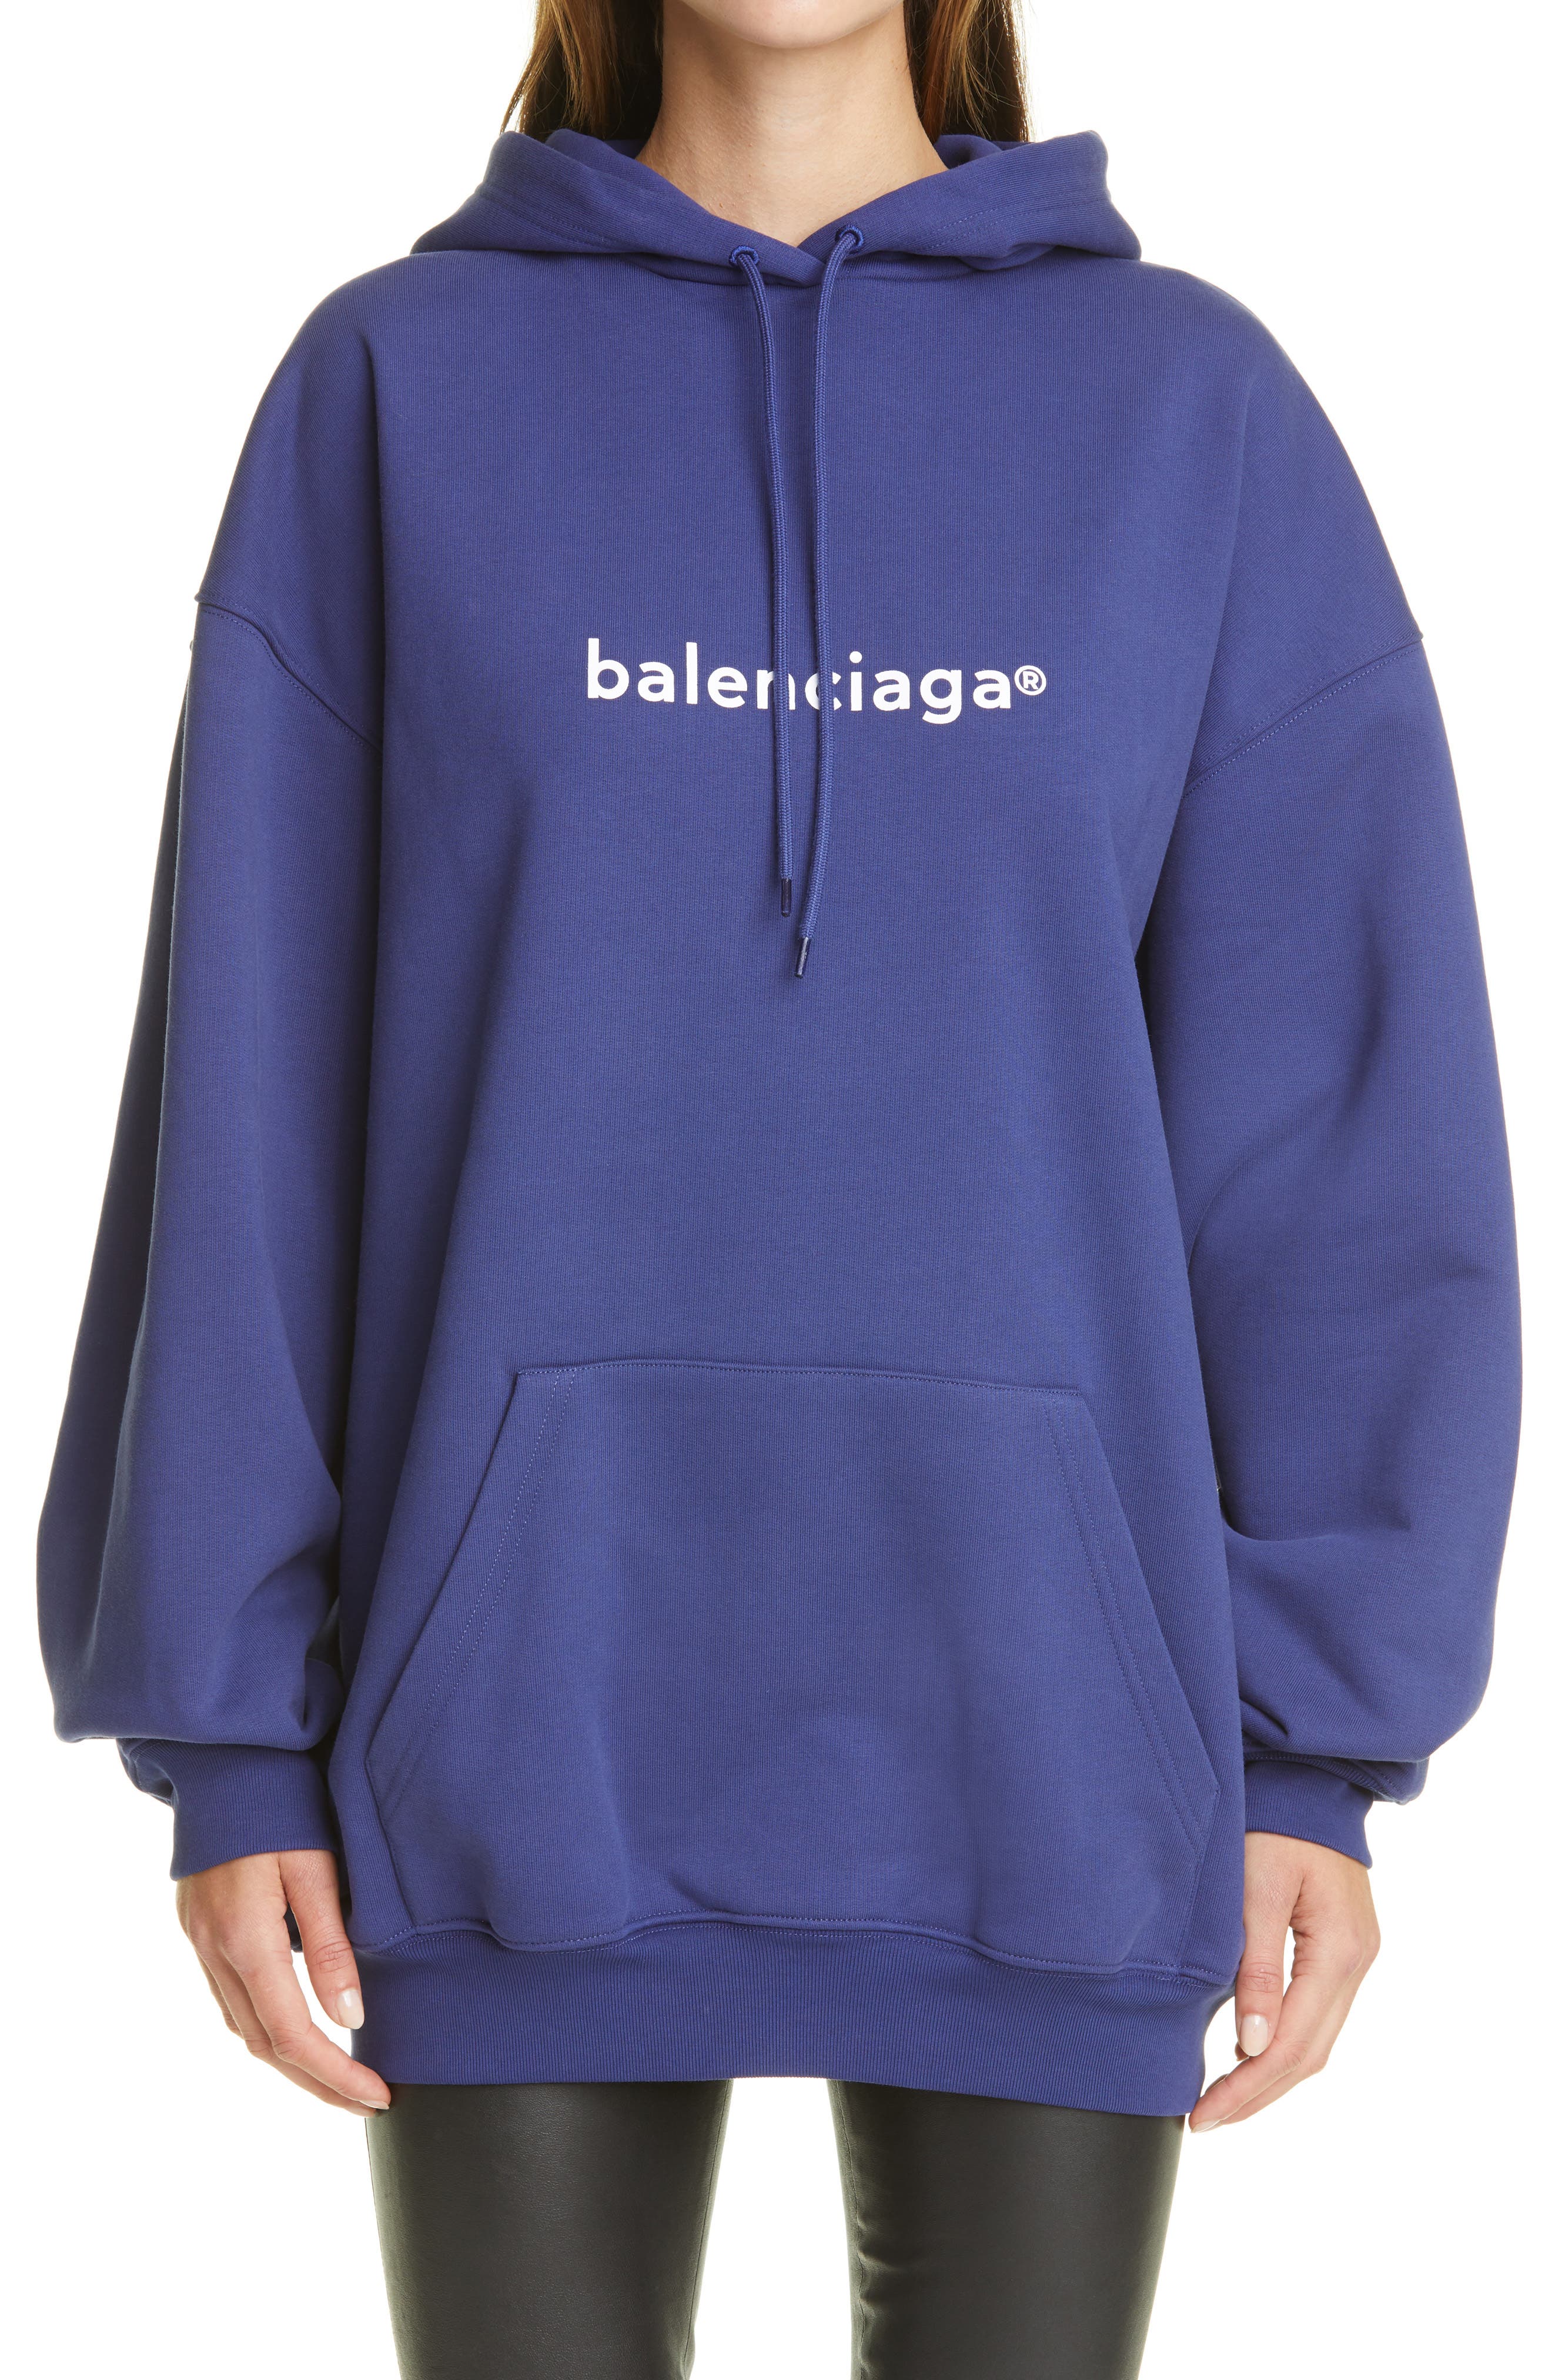 Balenciaga Clothes For Women Top Sellers, 54% OFF | www 